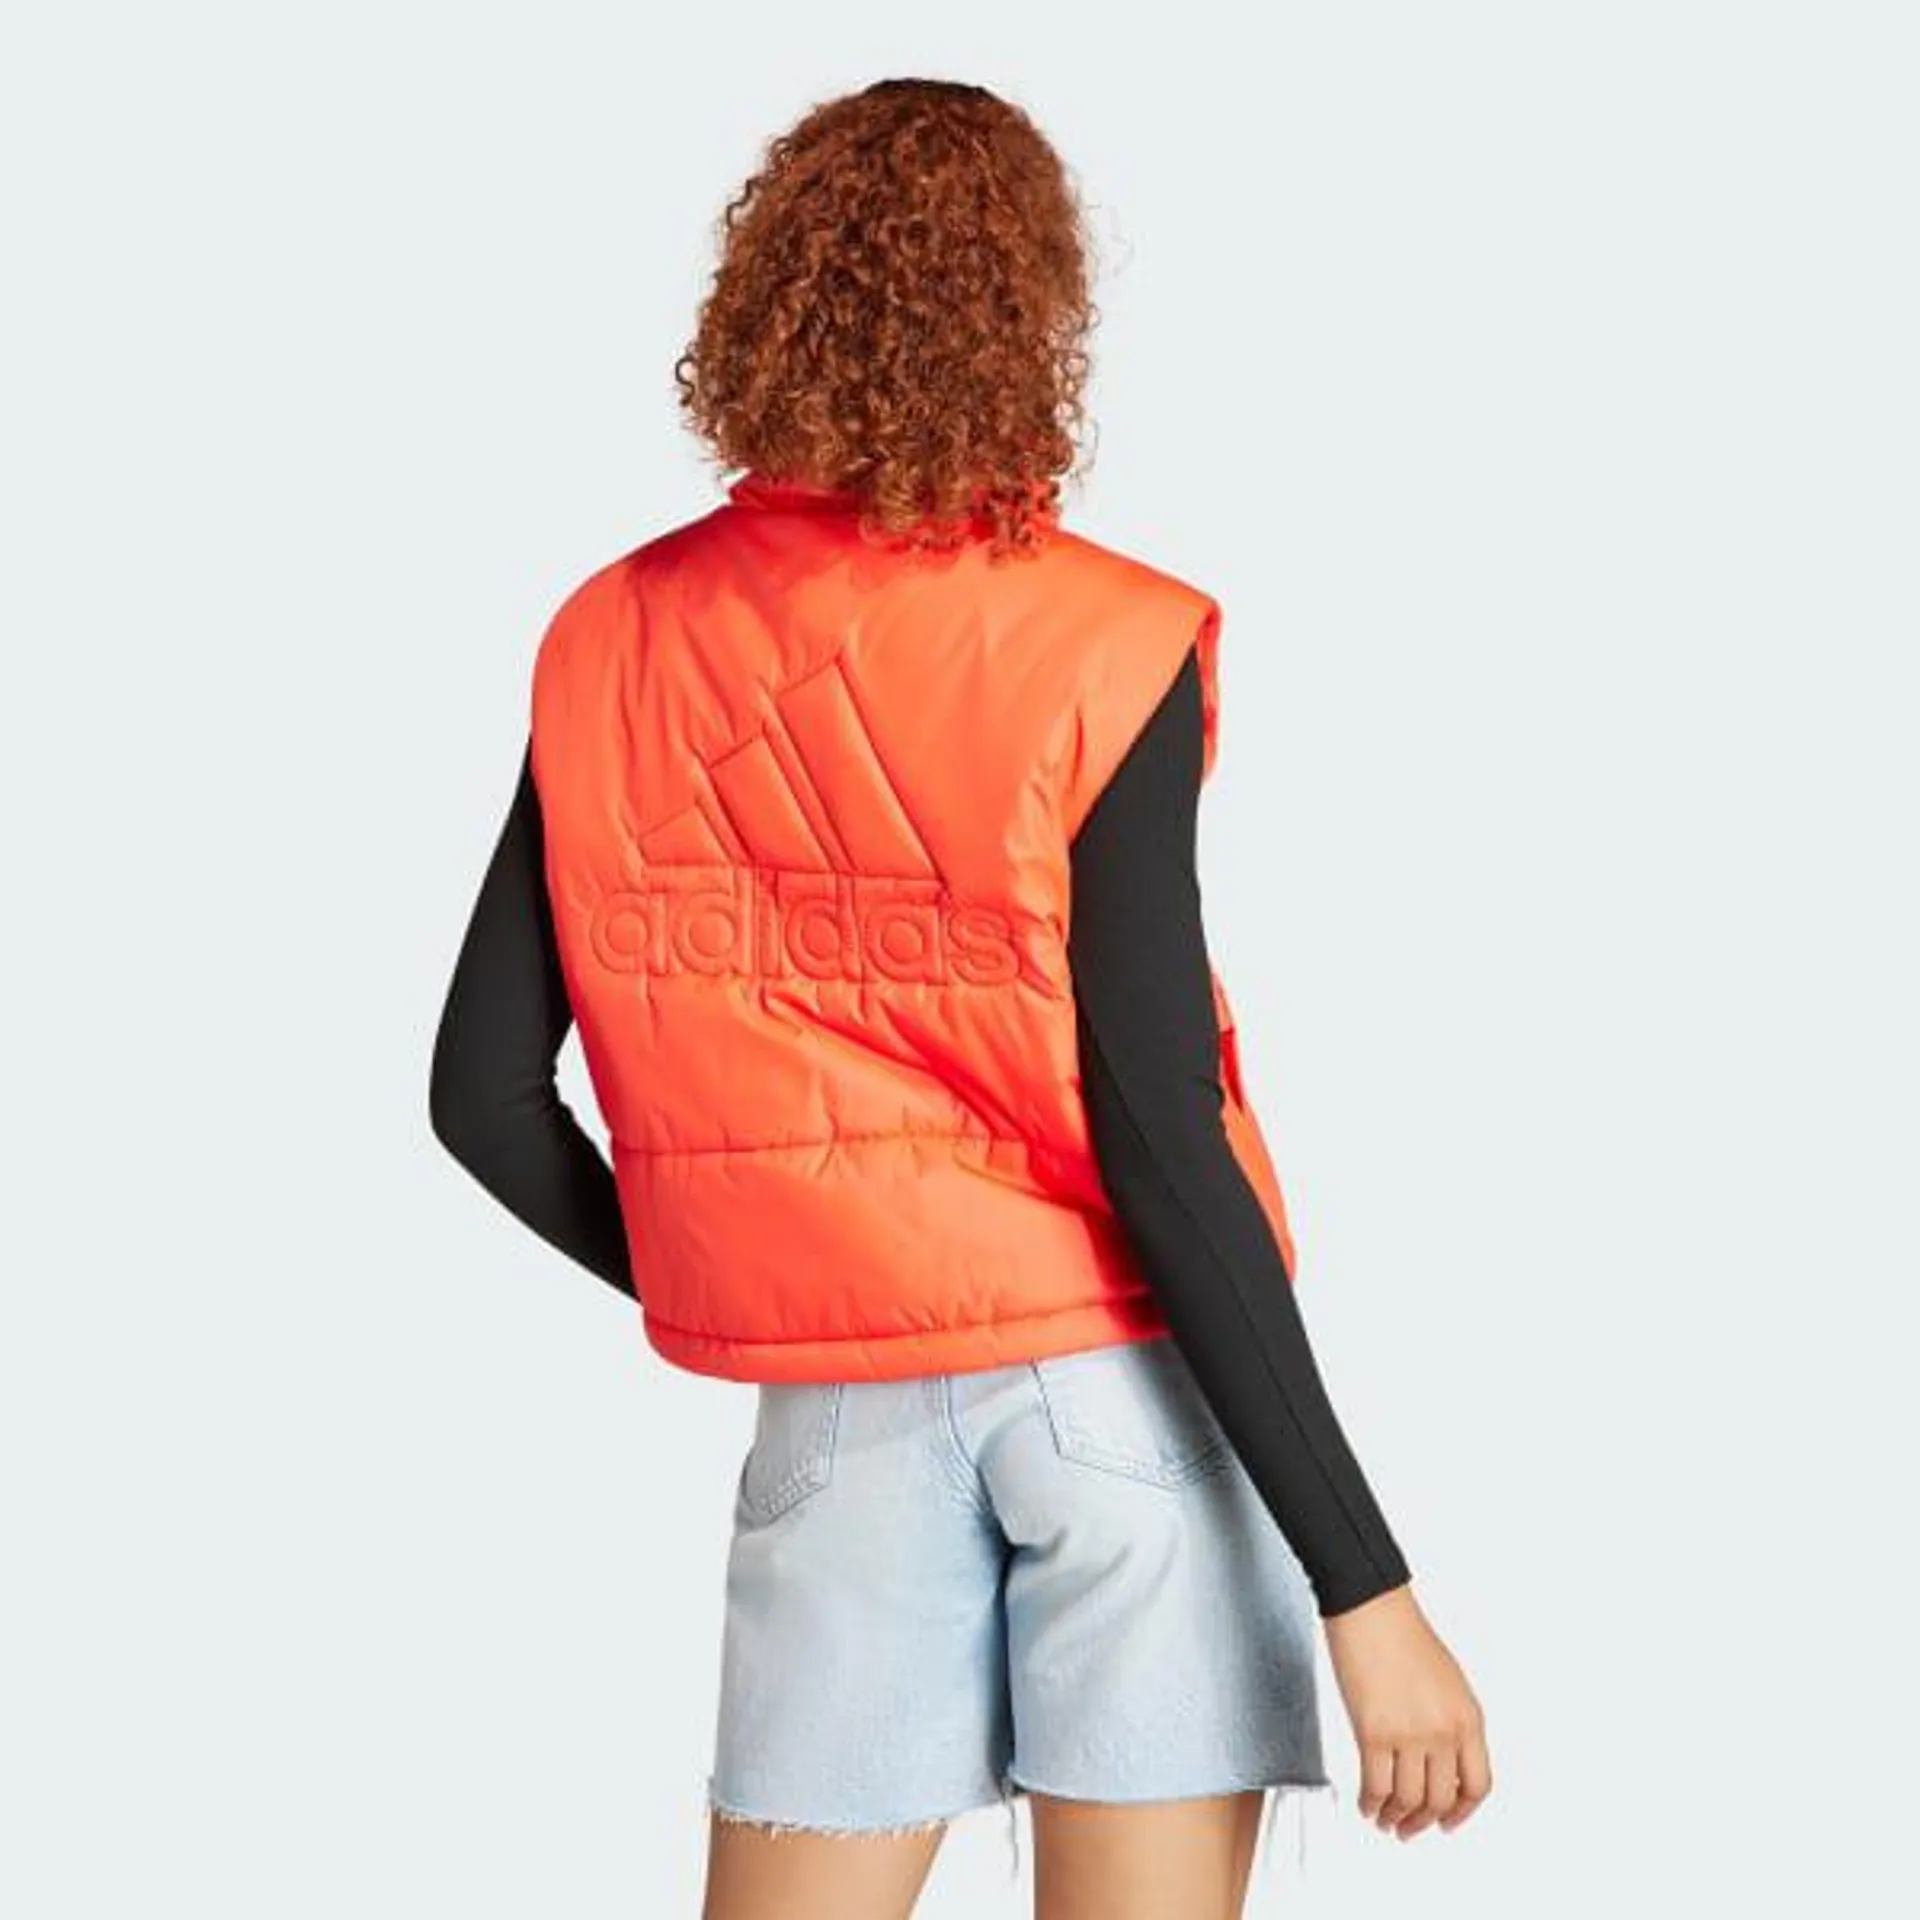 3-Stripes Insulated Vest